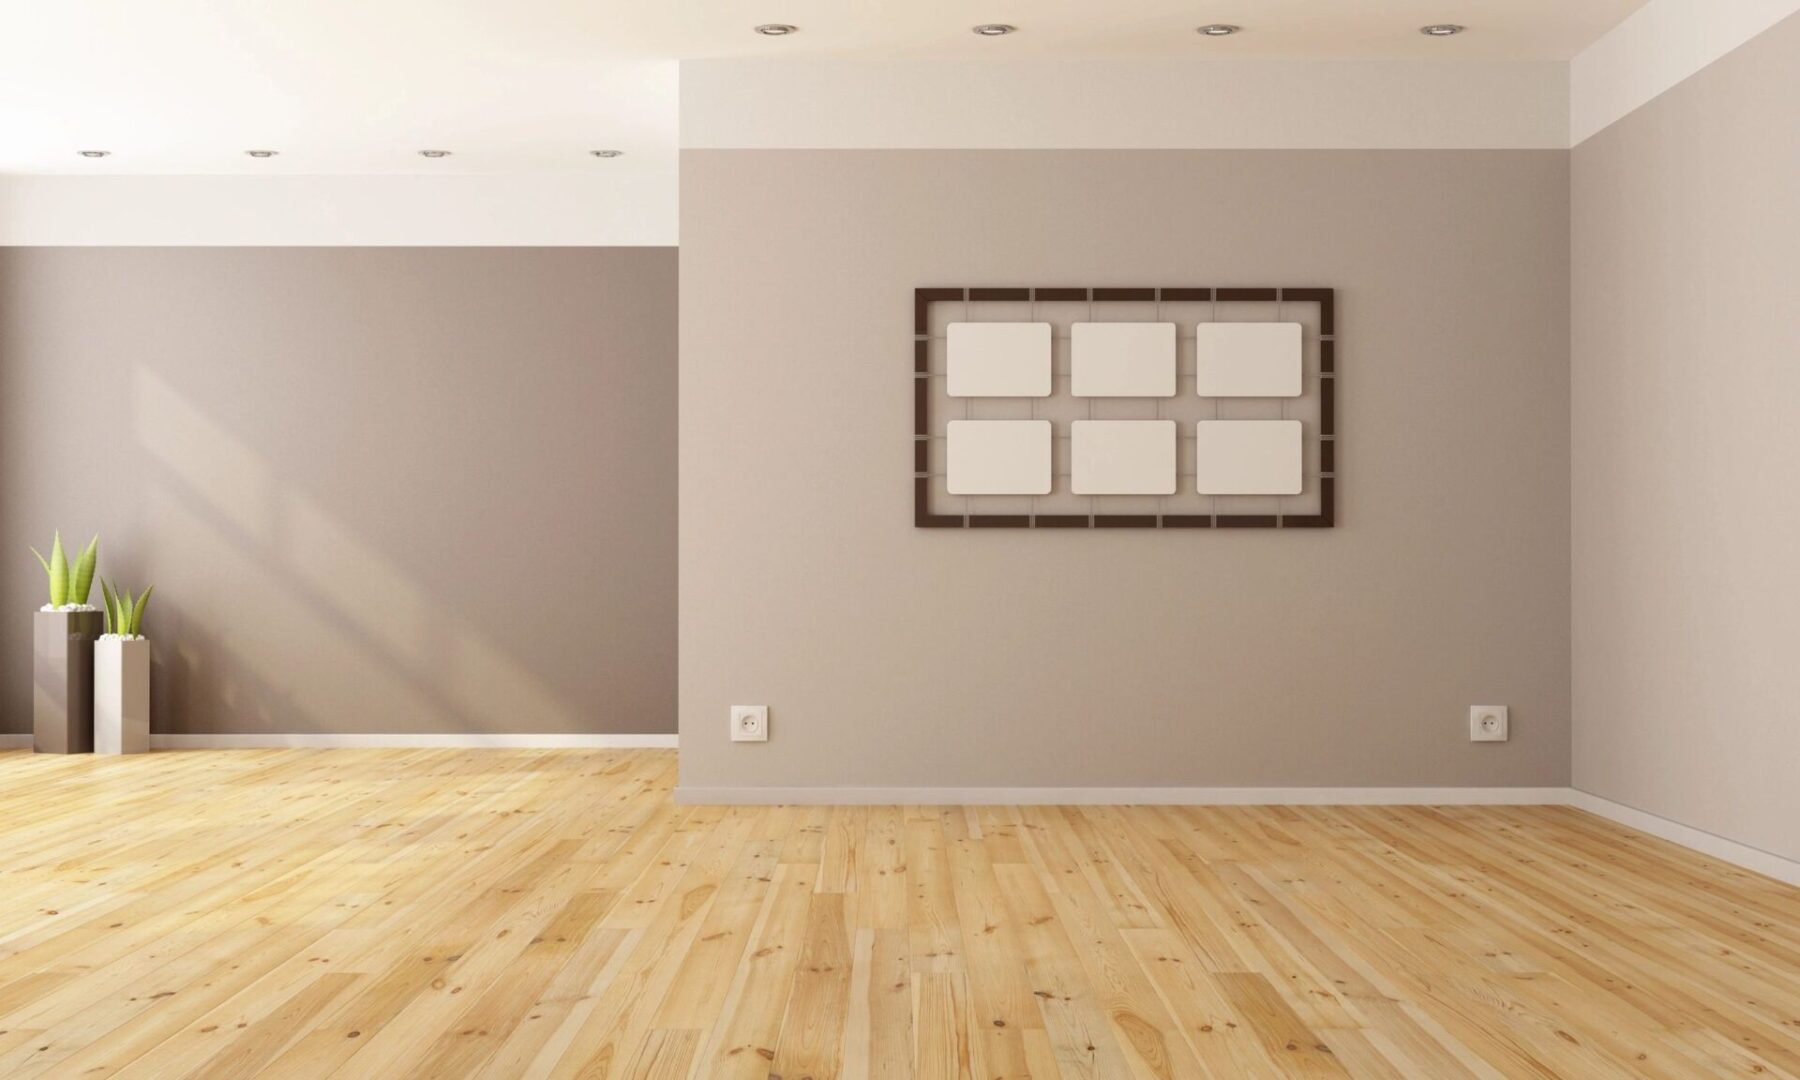 A room with wood floors and a picture frame on the wall.